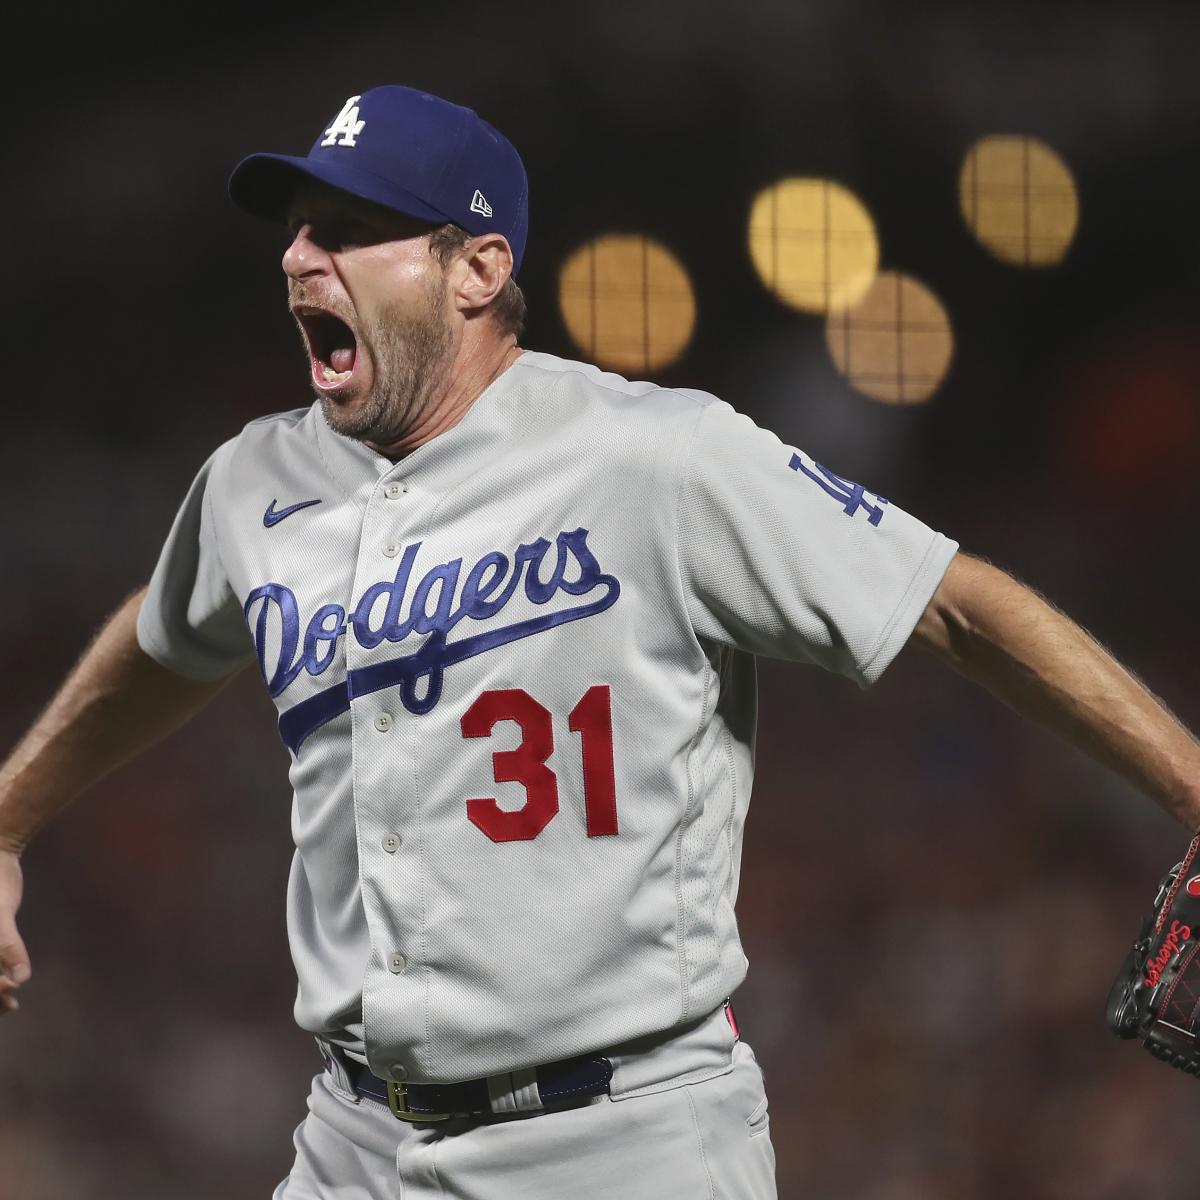 NLCS Bracket 2021 Schedule Info, Odds Guide and Series Predictions